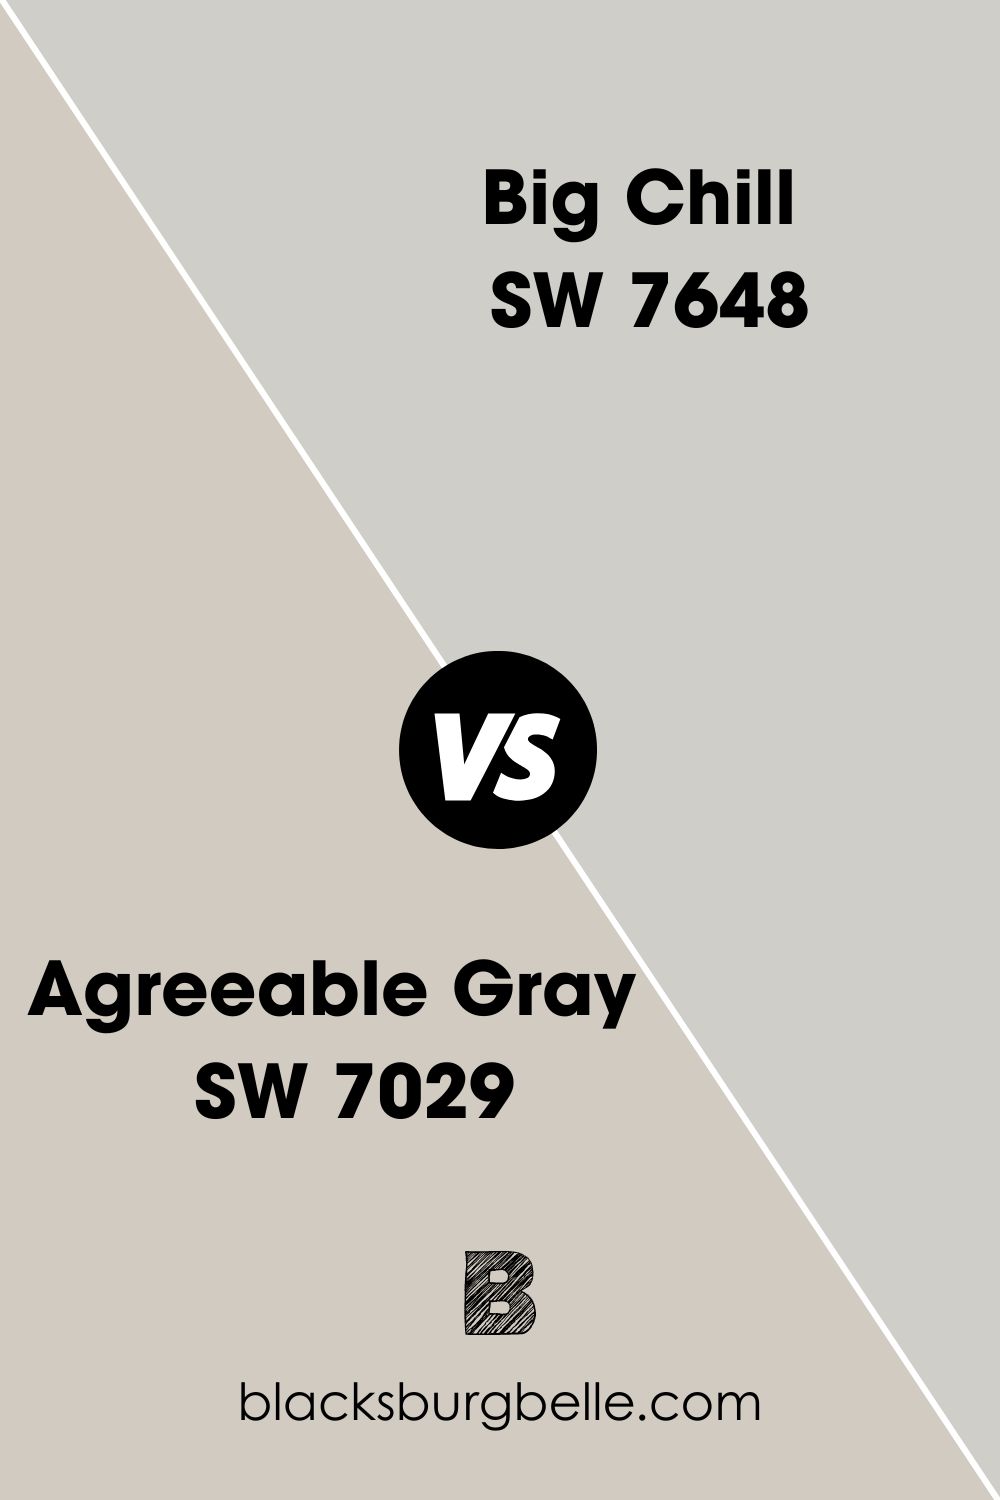 Agreeable Gray SW 7029